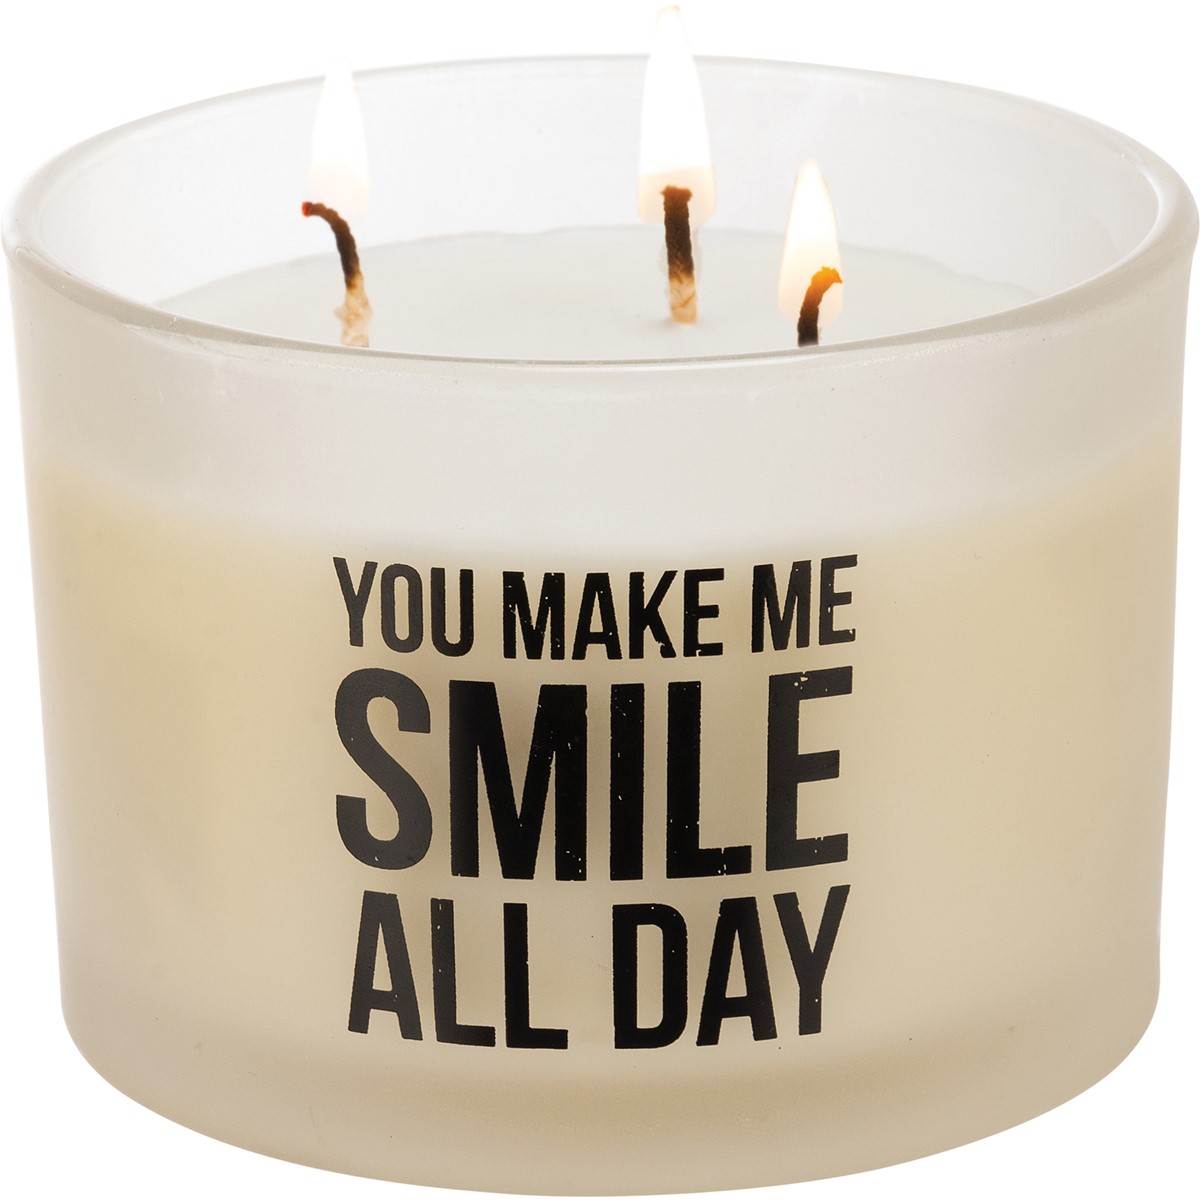 You Make Me Smile All Day Candle - Soy Wax, Glass, Cotton